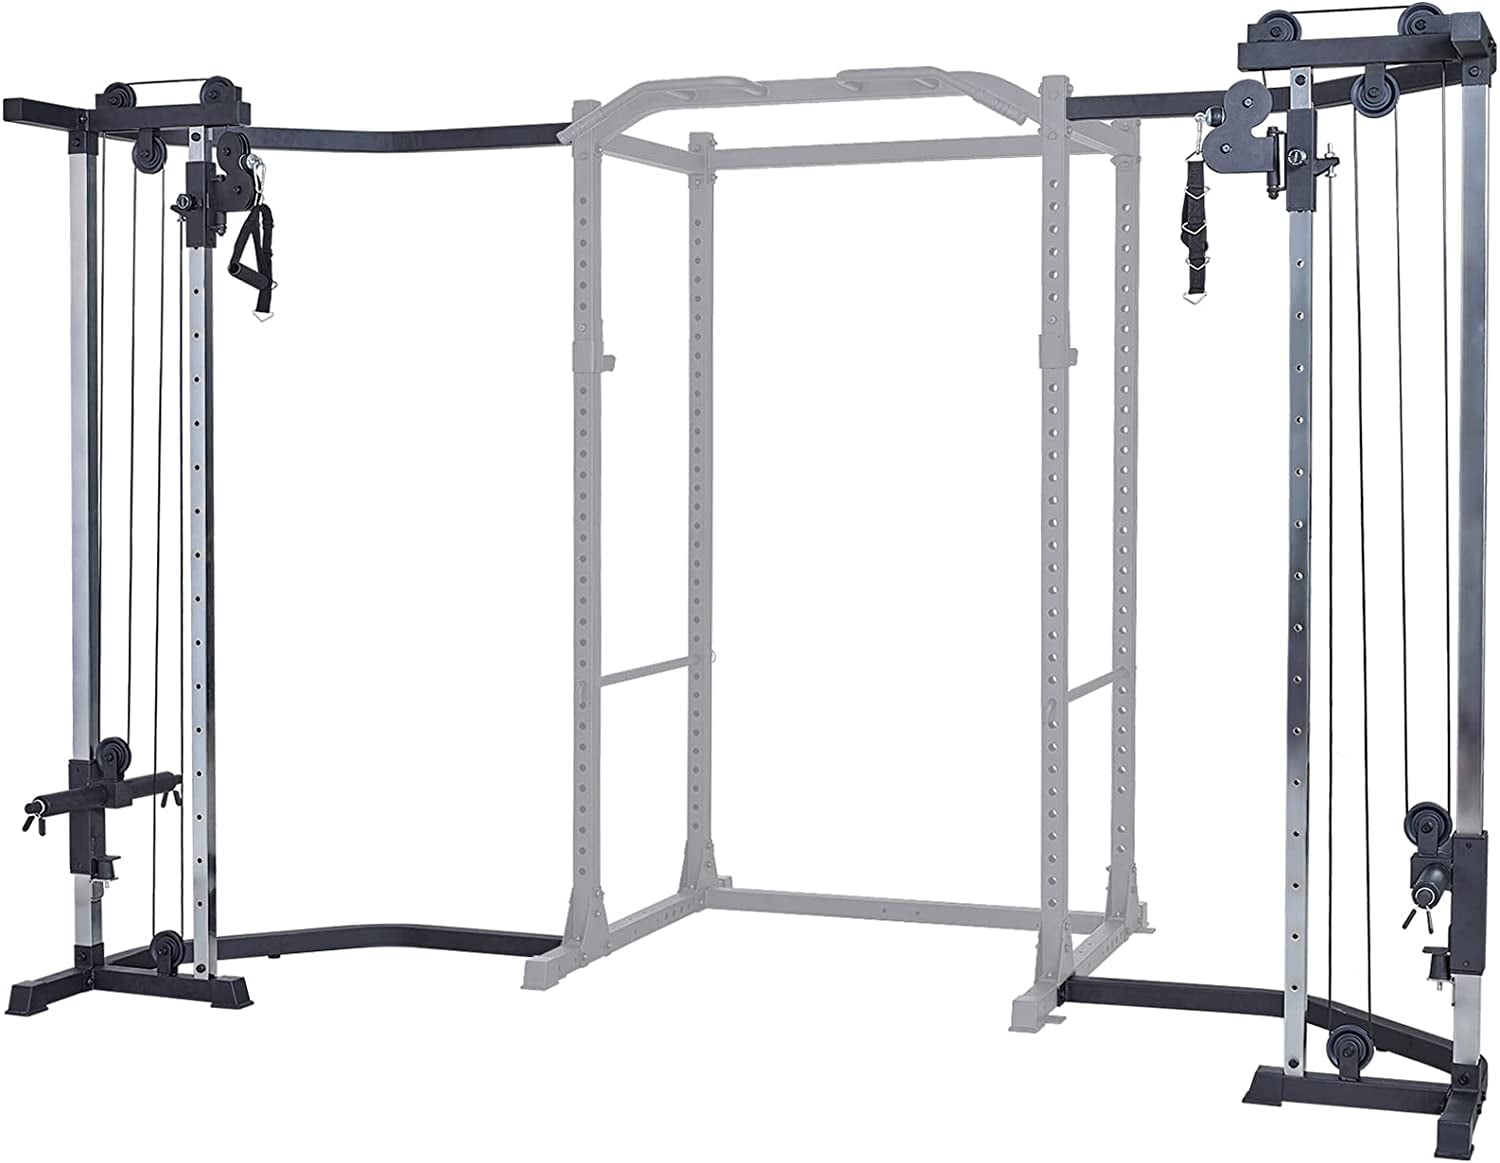 PAPABABE CC-20 LAT Pulldown Attachment Low Row Machine For PAB-22 and PAB-24 Power Cage Lat Pulldown Machine 